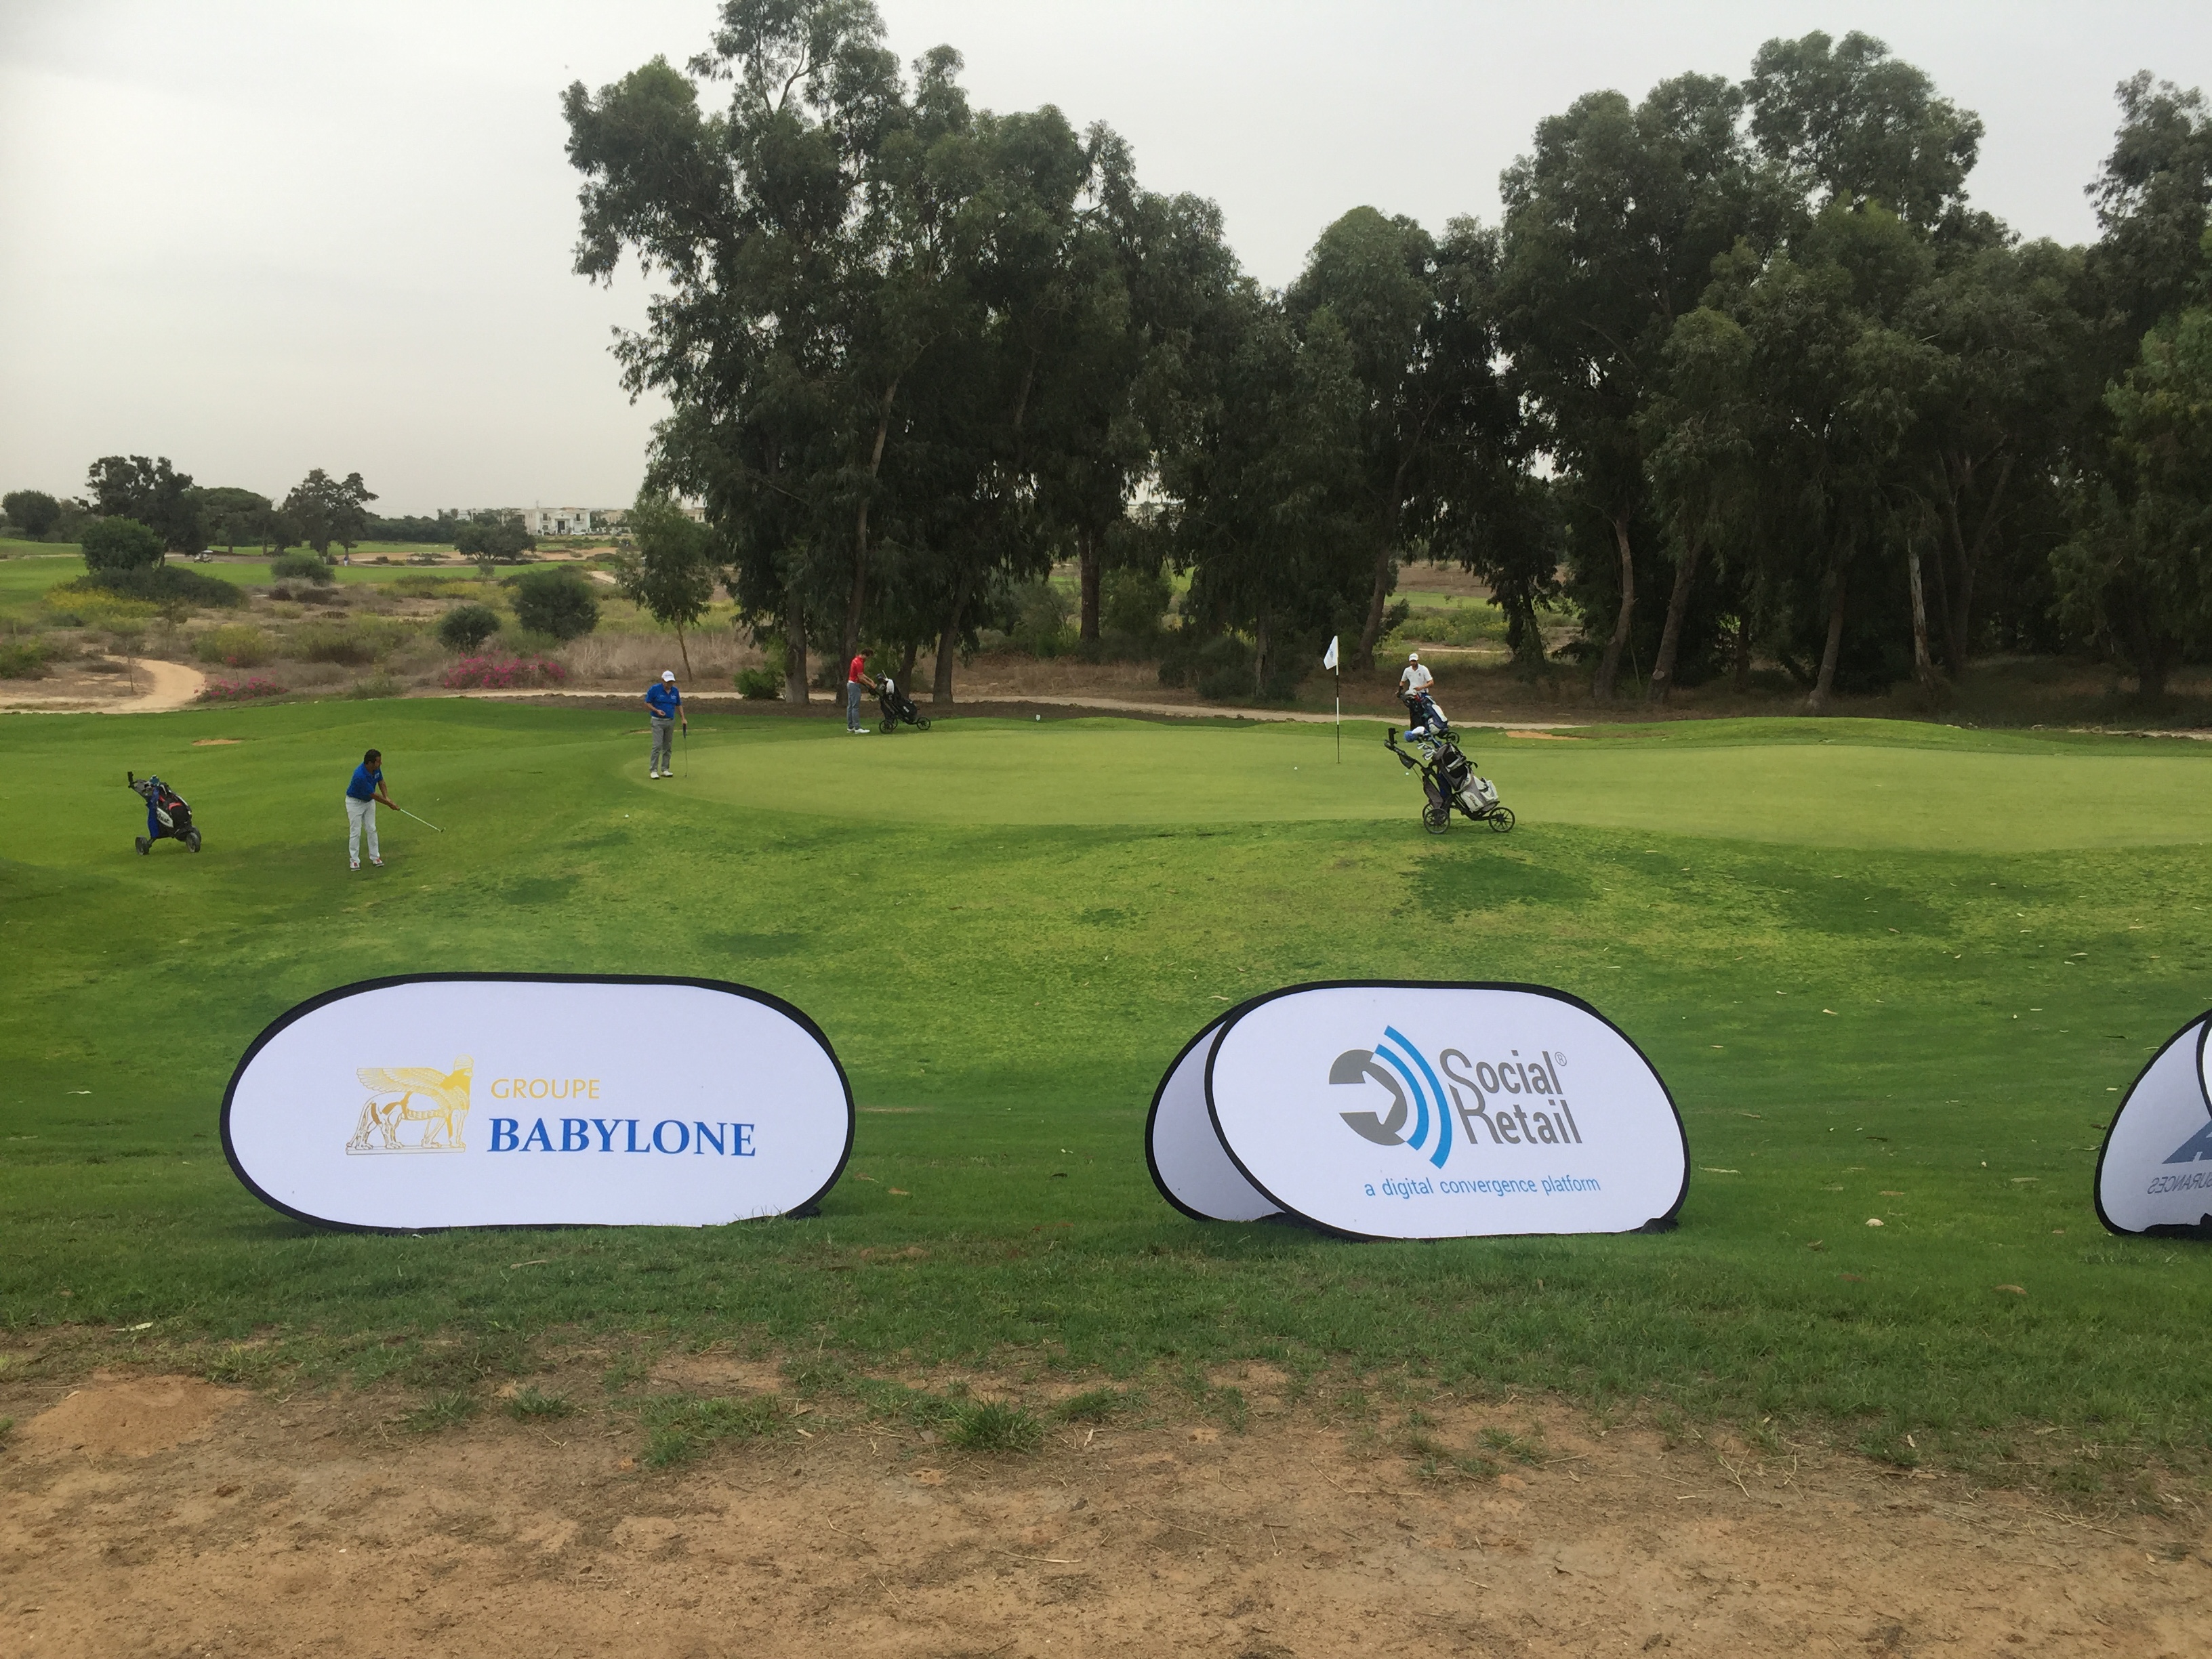 Digital Social Retail transforms the spectator experience at Israel’s first golf masters